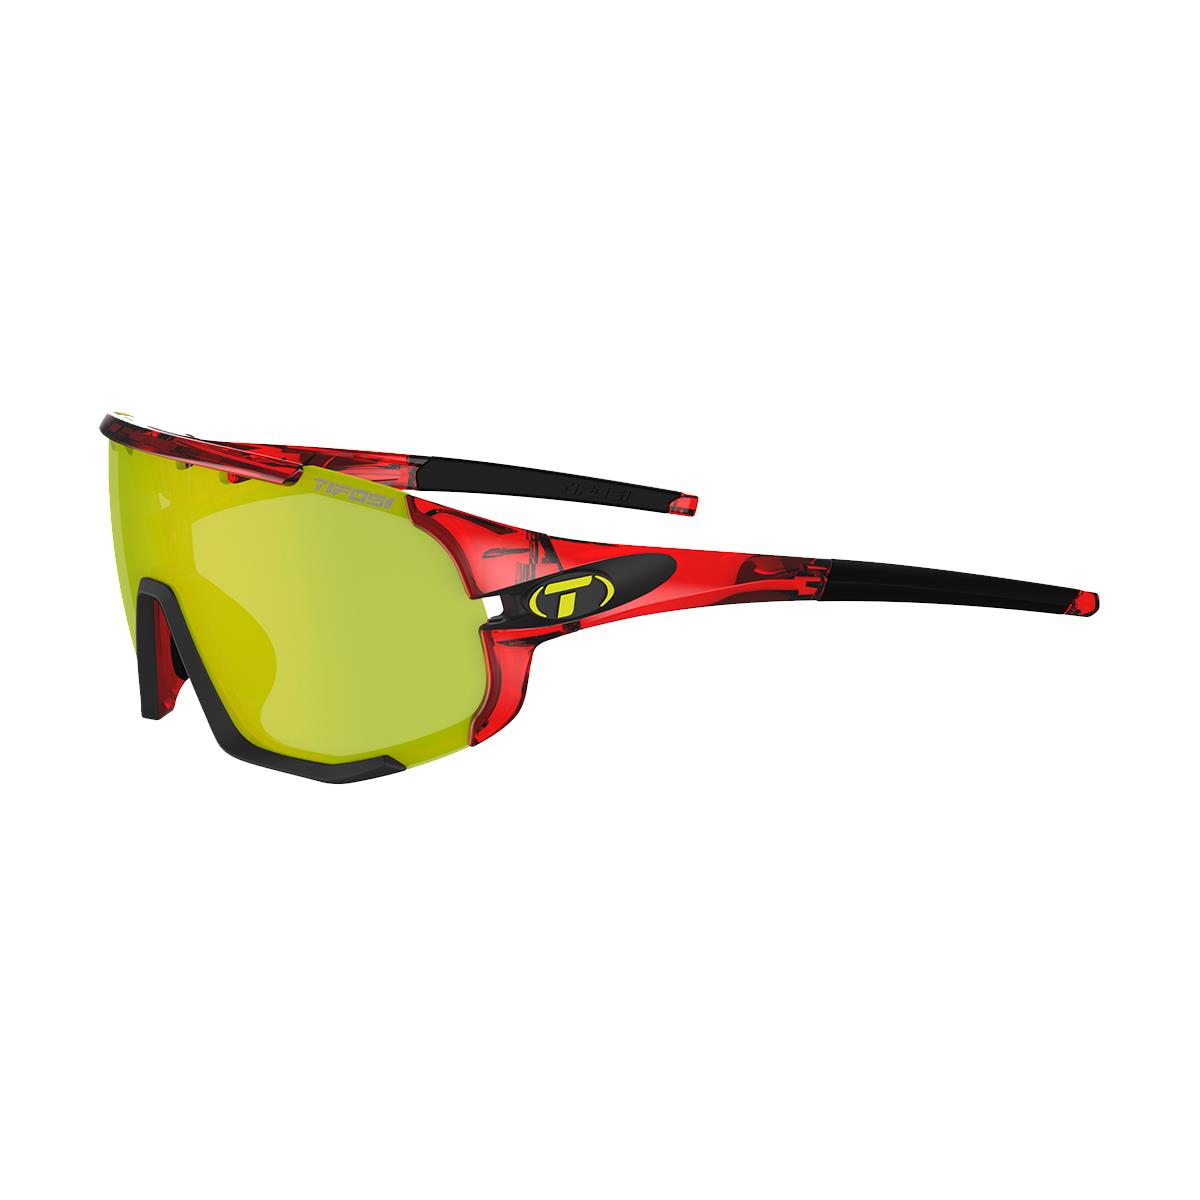 Tifosi Sledge interchangeable clarion lens sunglasses: crystal red/clarion yellow